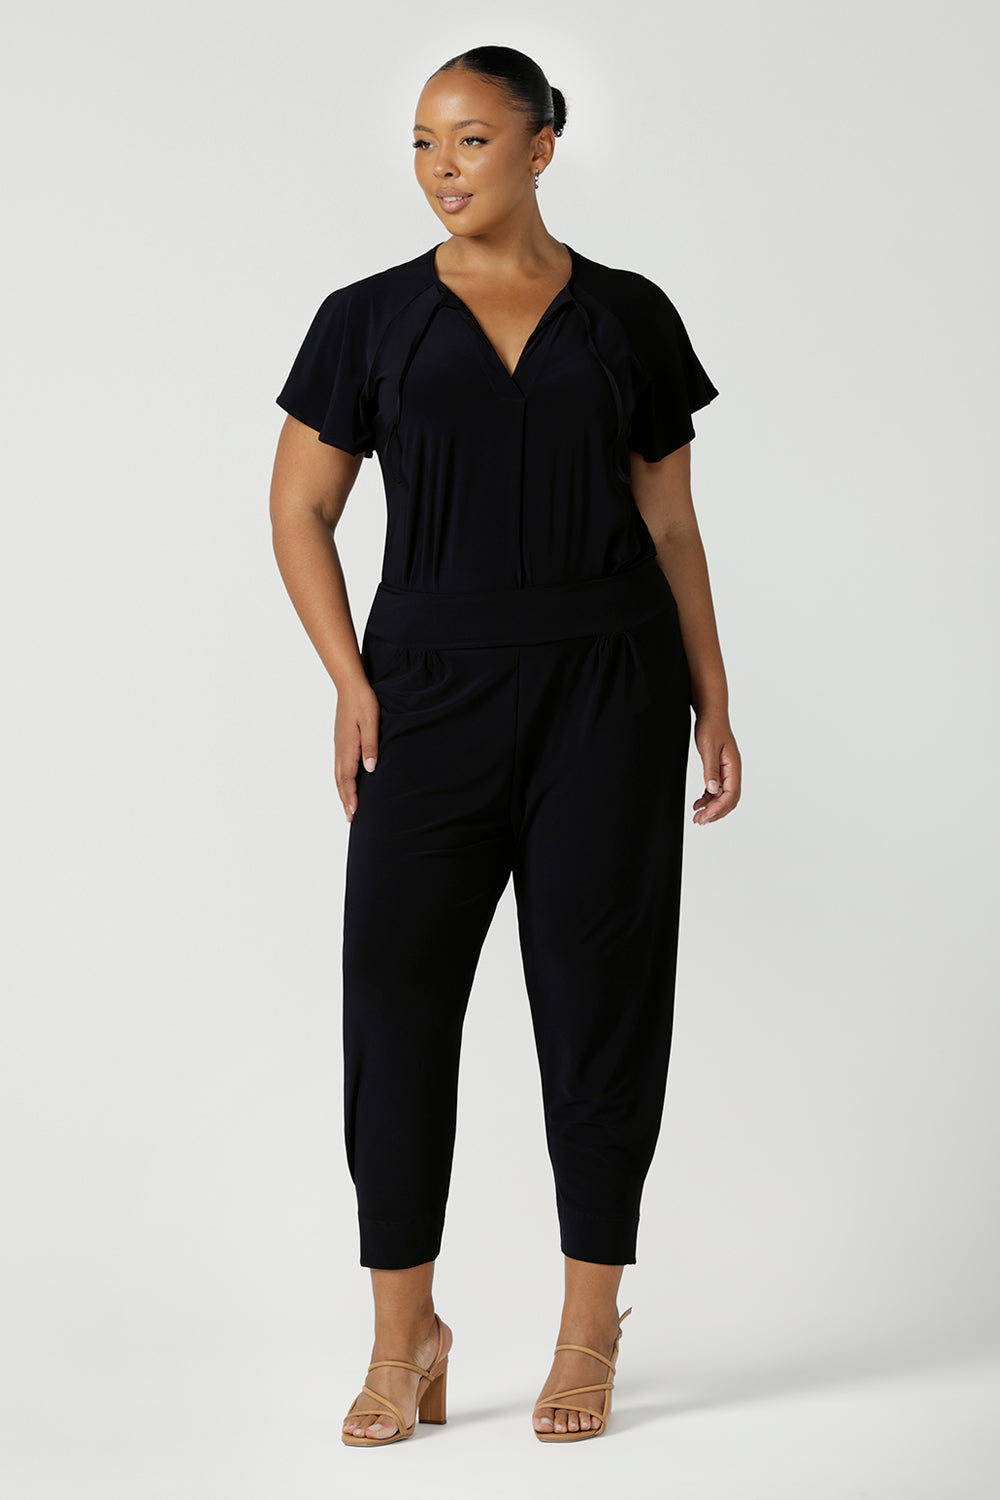 A plus size, size 18 woman wears a casual jersey top in navy blue. Worn with dropped crotch travel pants in navy blue,  this Australian-made women's top has short raglan sleeves, a V-neckline and a shirttail hem - perfect for weekend casual and travel capsule wardrobes. 